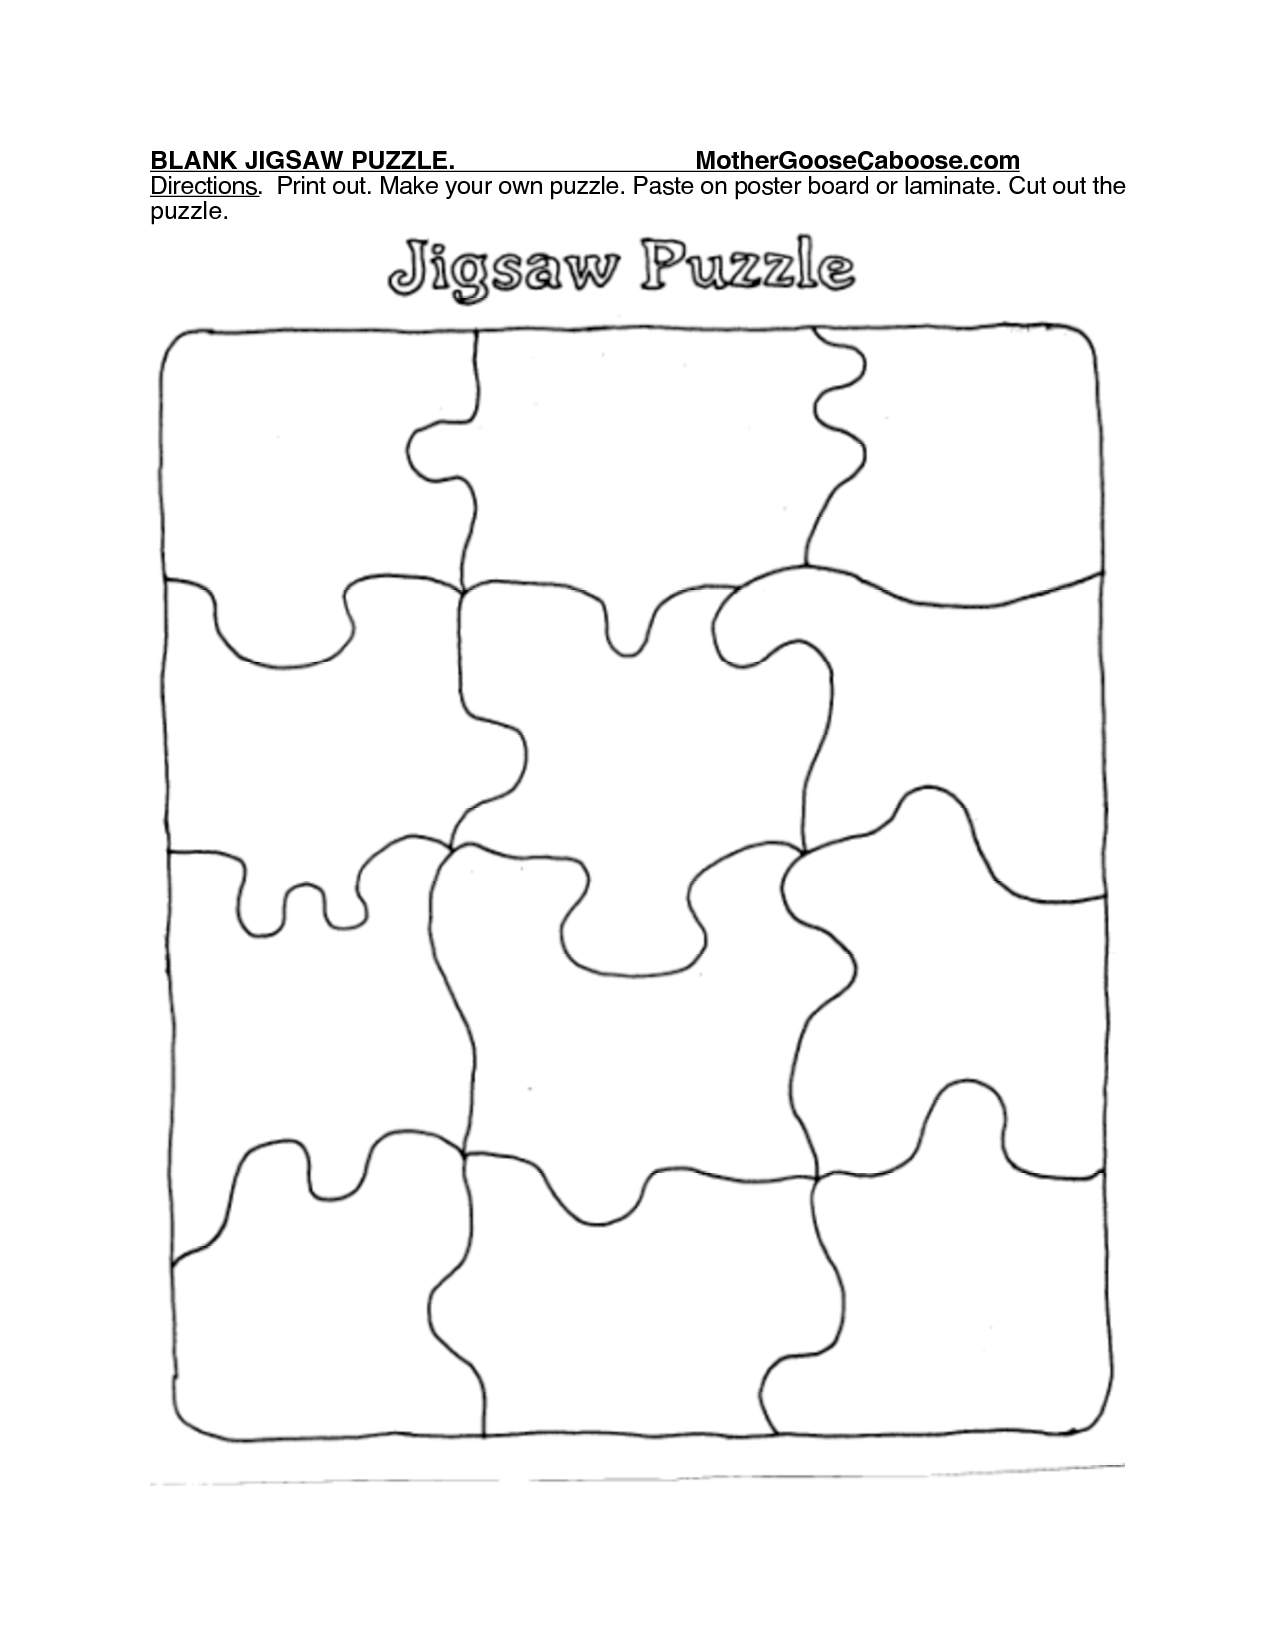 Printable Puzzle Piece Template | Search Results | New Calendar - Printable Jigsaw Puzzles Template